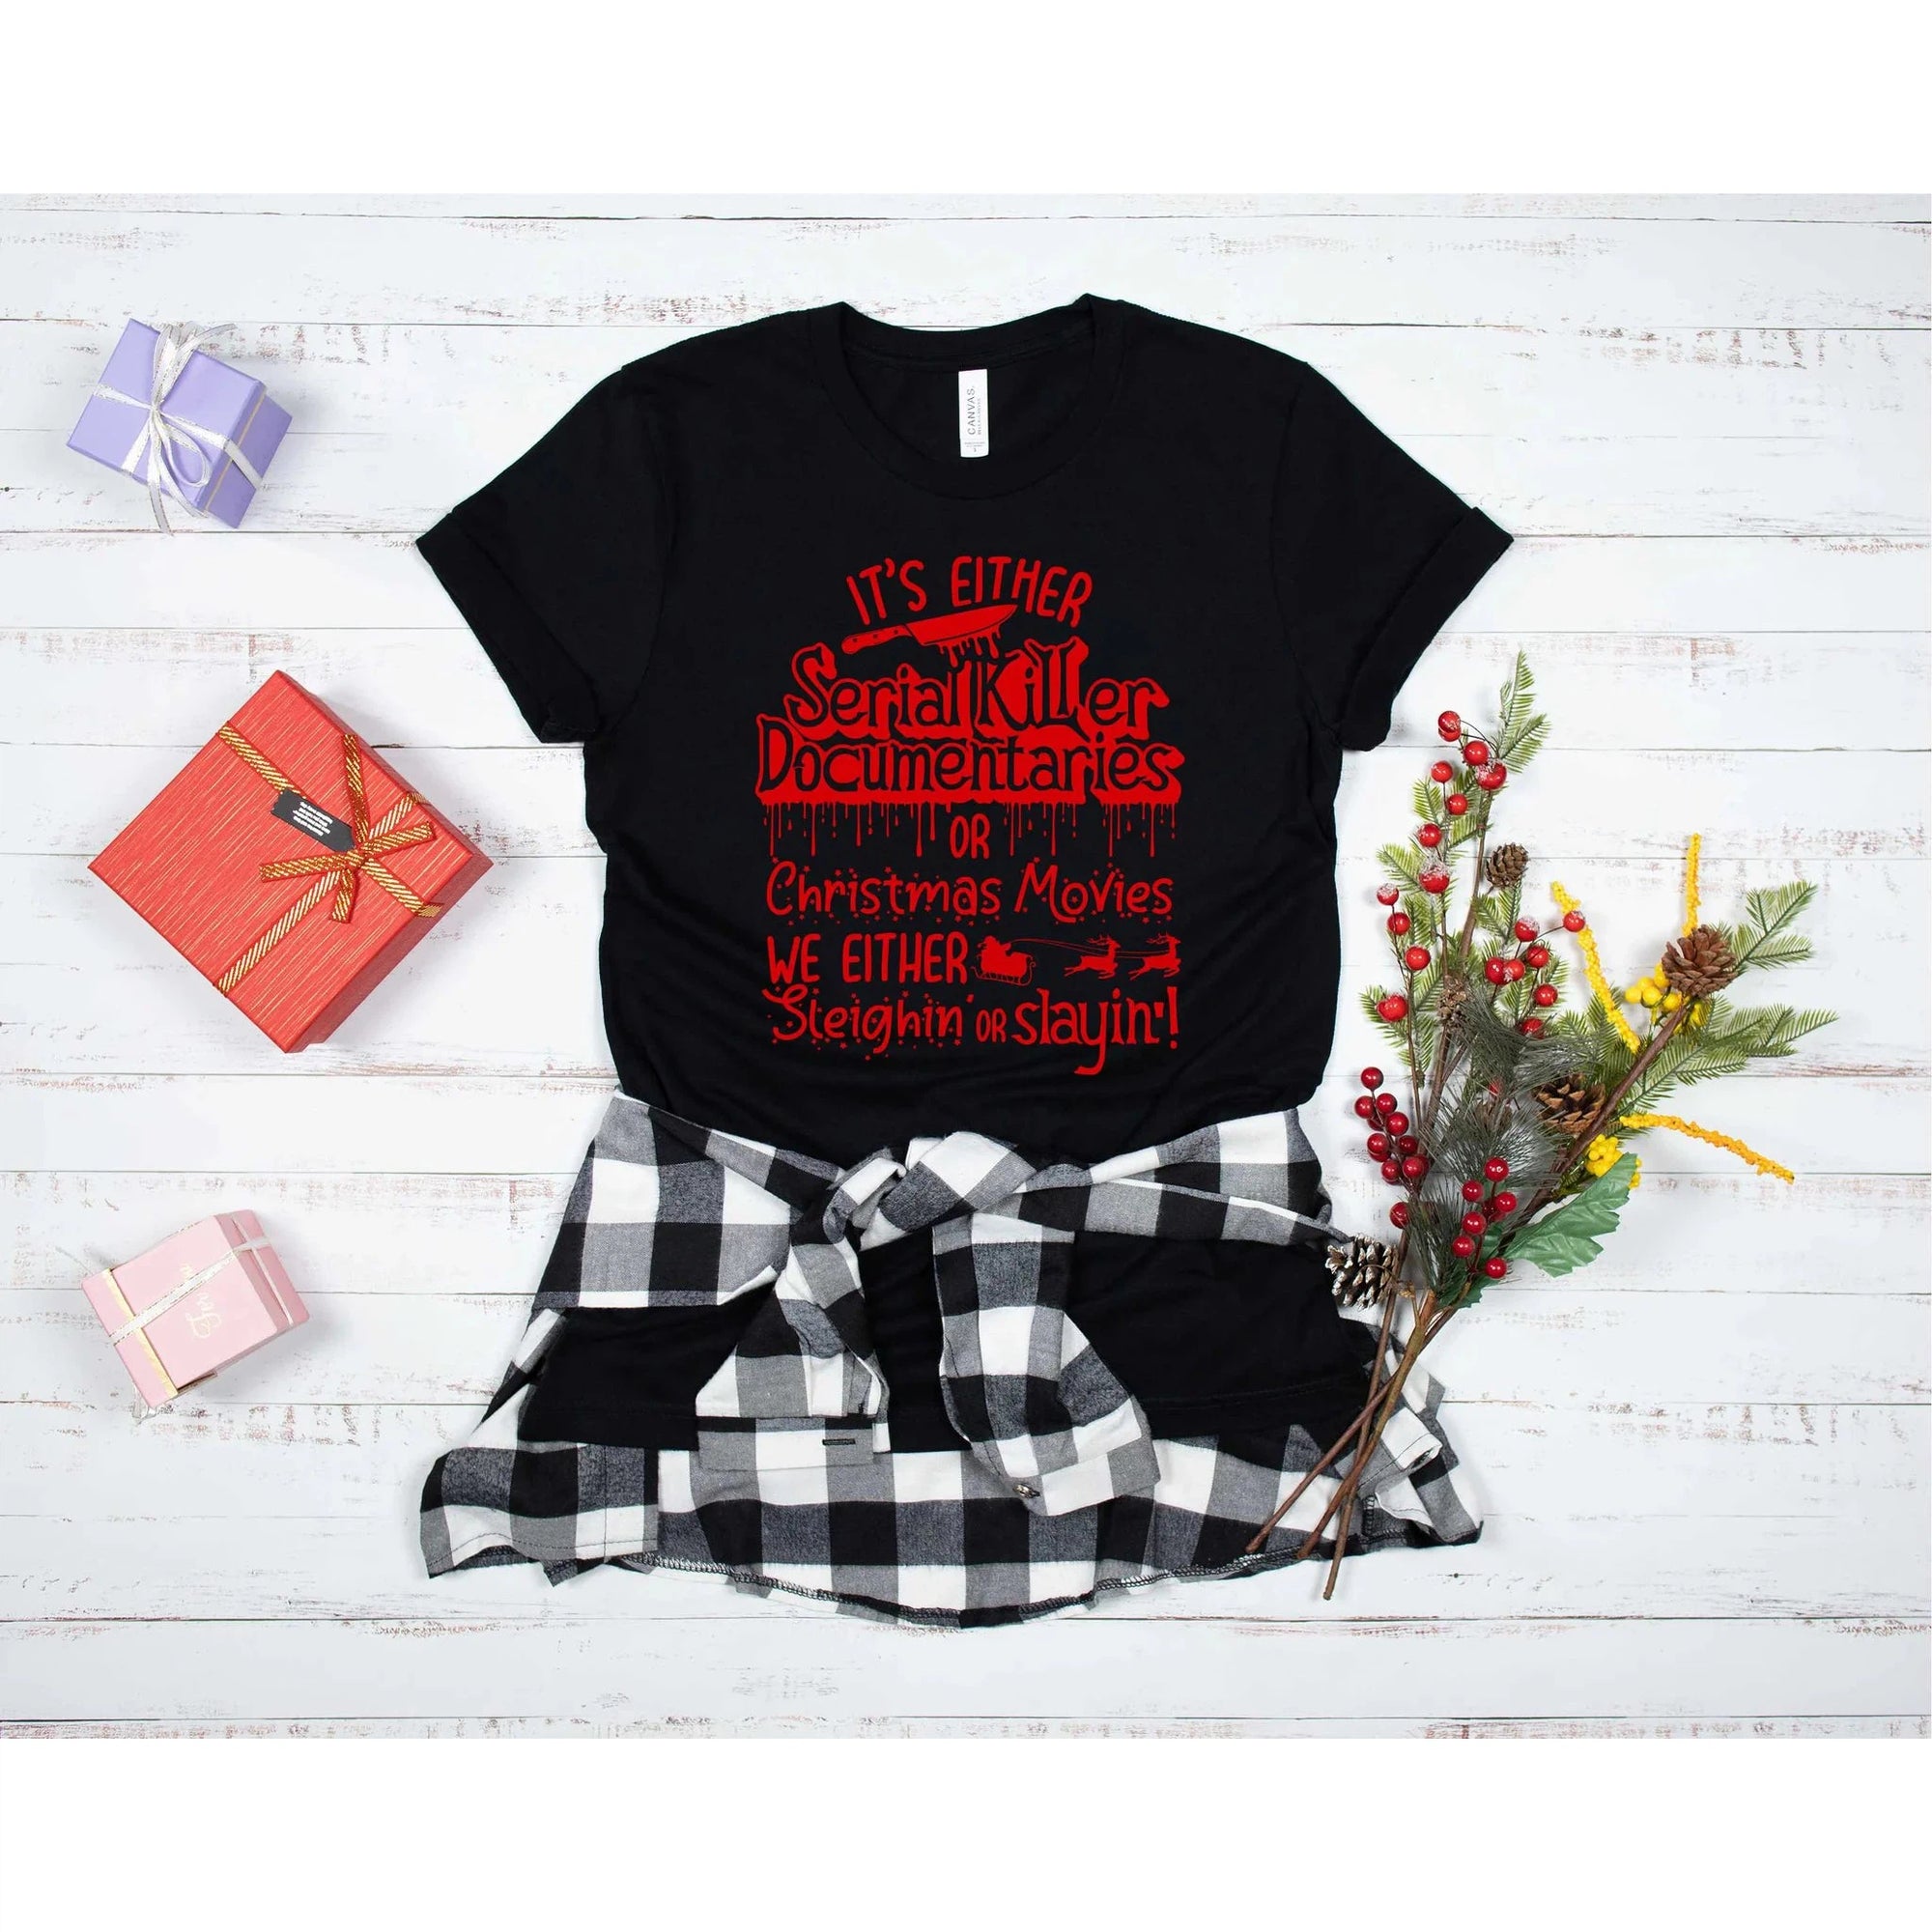 Serial Killer Documentaries or Christmas Movies Graphic Tee with color options